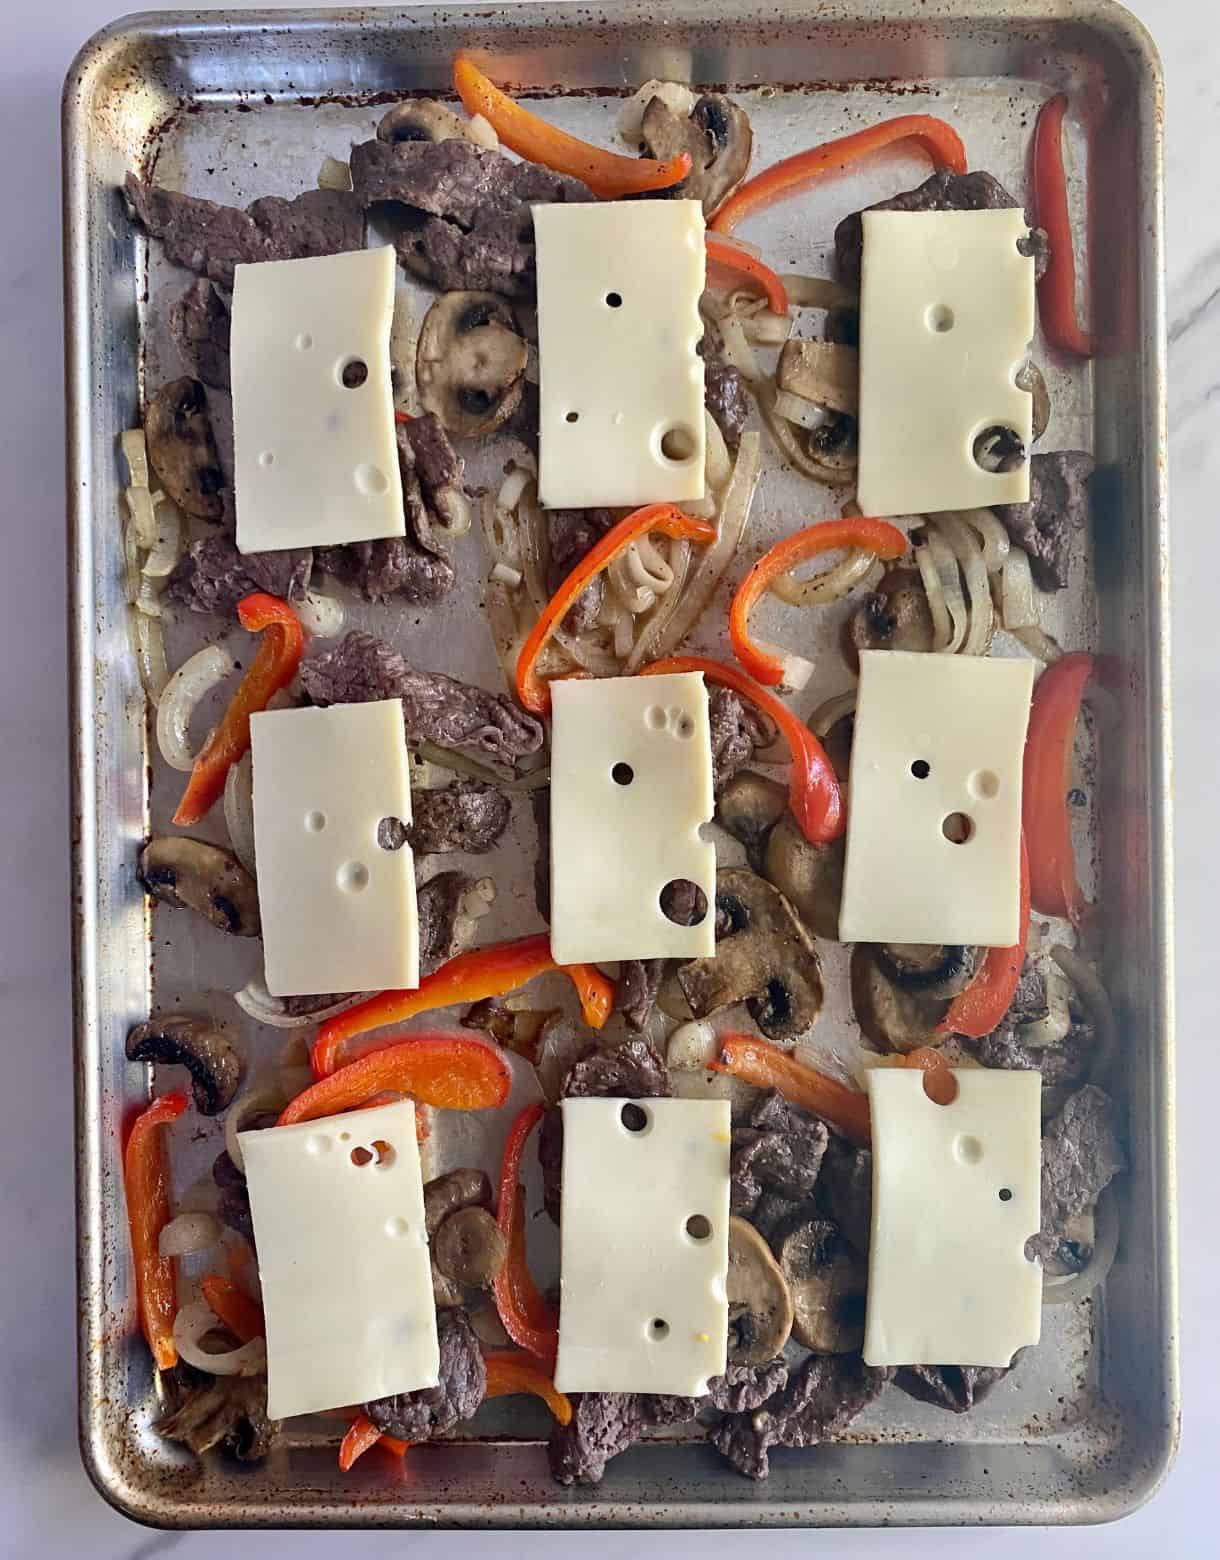 A sheet pan with cooked cheesesteak with onions, mushrooms and peppers topped with Swiss cheese and ready for the final bake to melt the cheese.